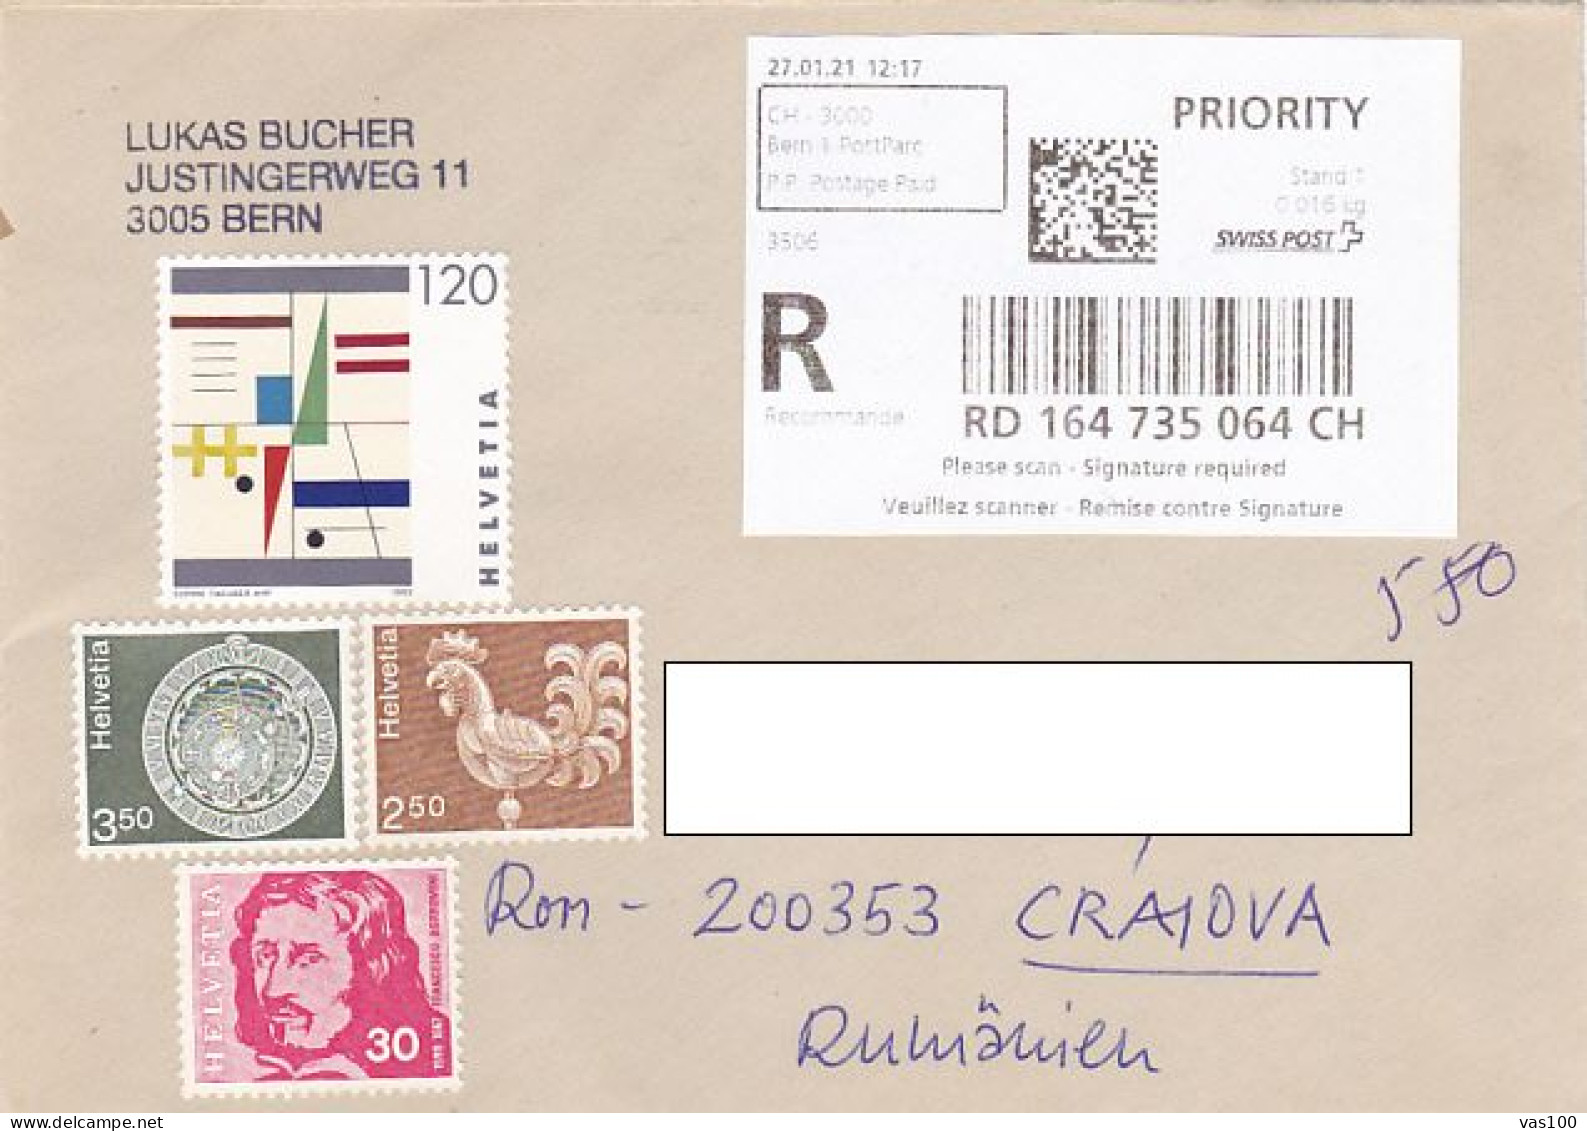 PAINTING, ASTRONOMICAL CLOCK, ROOSTER, FRANCESCO BORROMINI, STAMPS ON REGISTERED COVER, 2021, SWITZERLAND - Cartas & Documentos